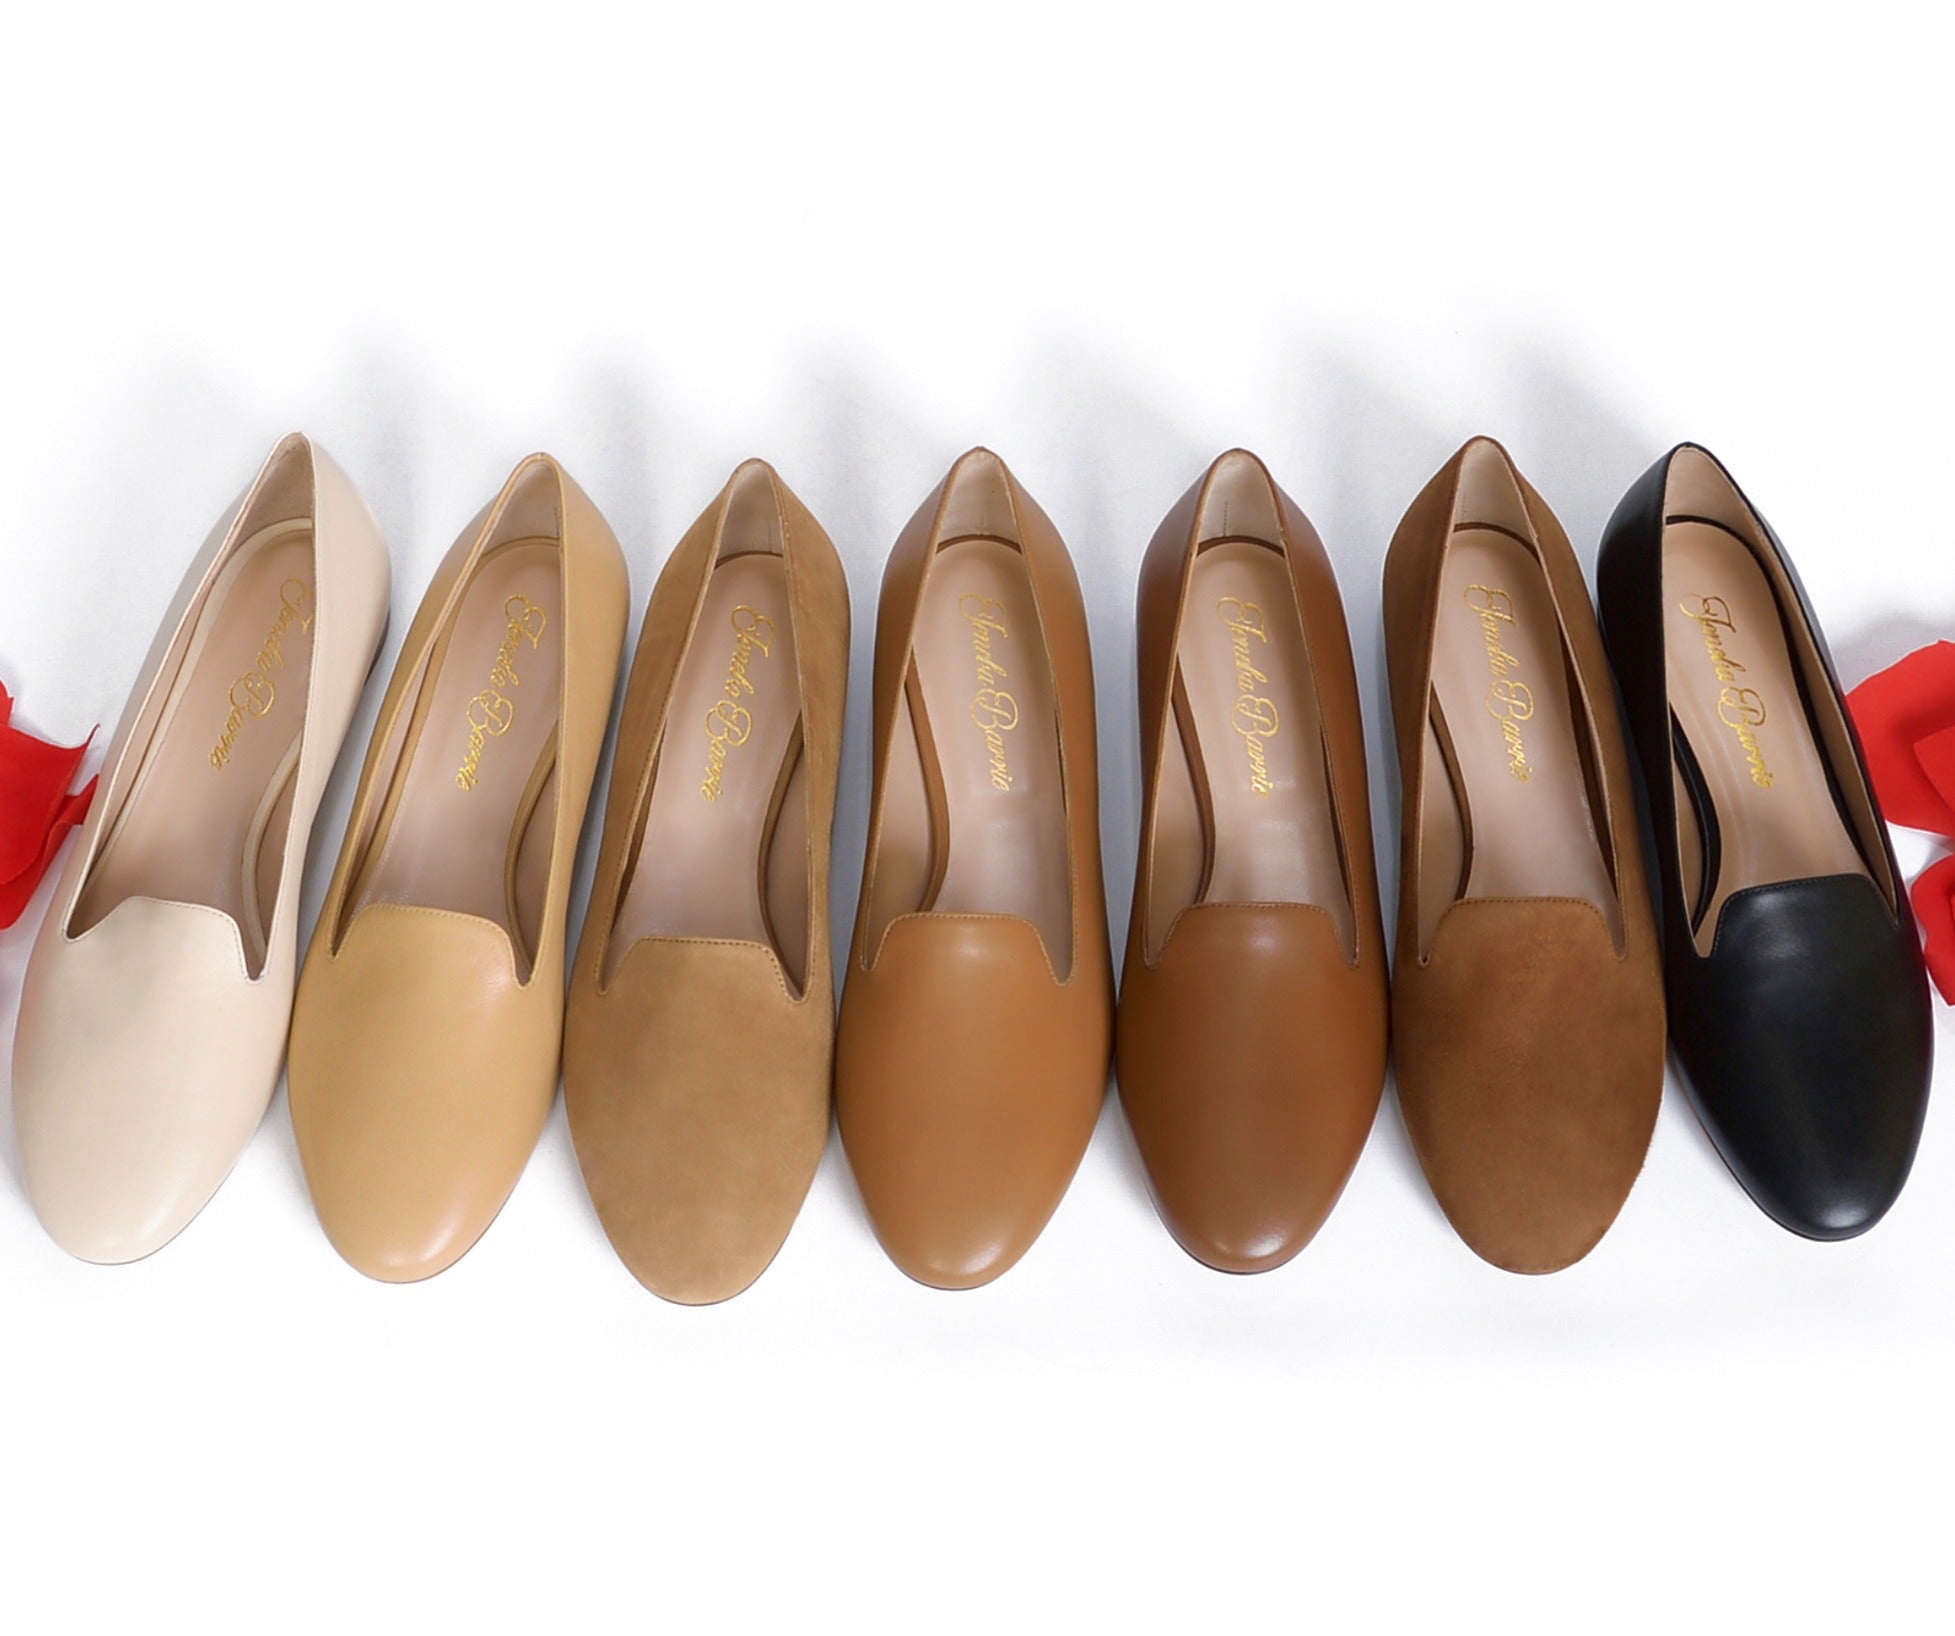 Light colored loafers. Business Professional. Office Wear. Women's loafers, flats, flat shoes. Office wear. Any occasion loafers.